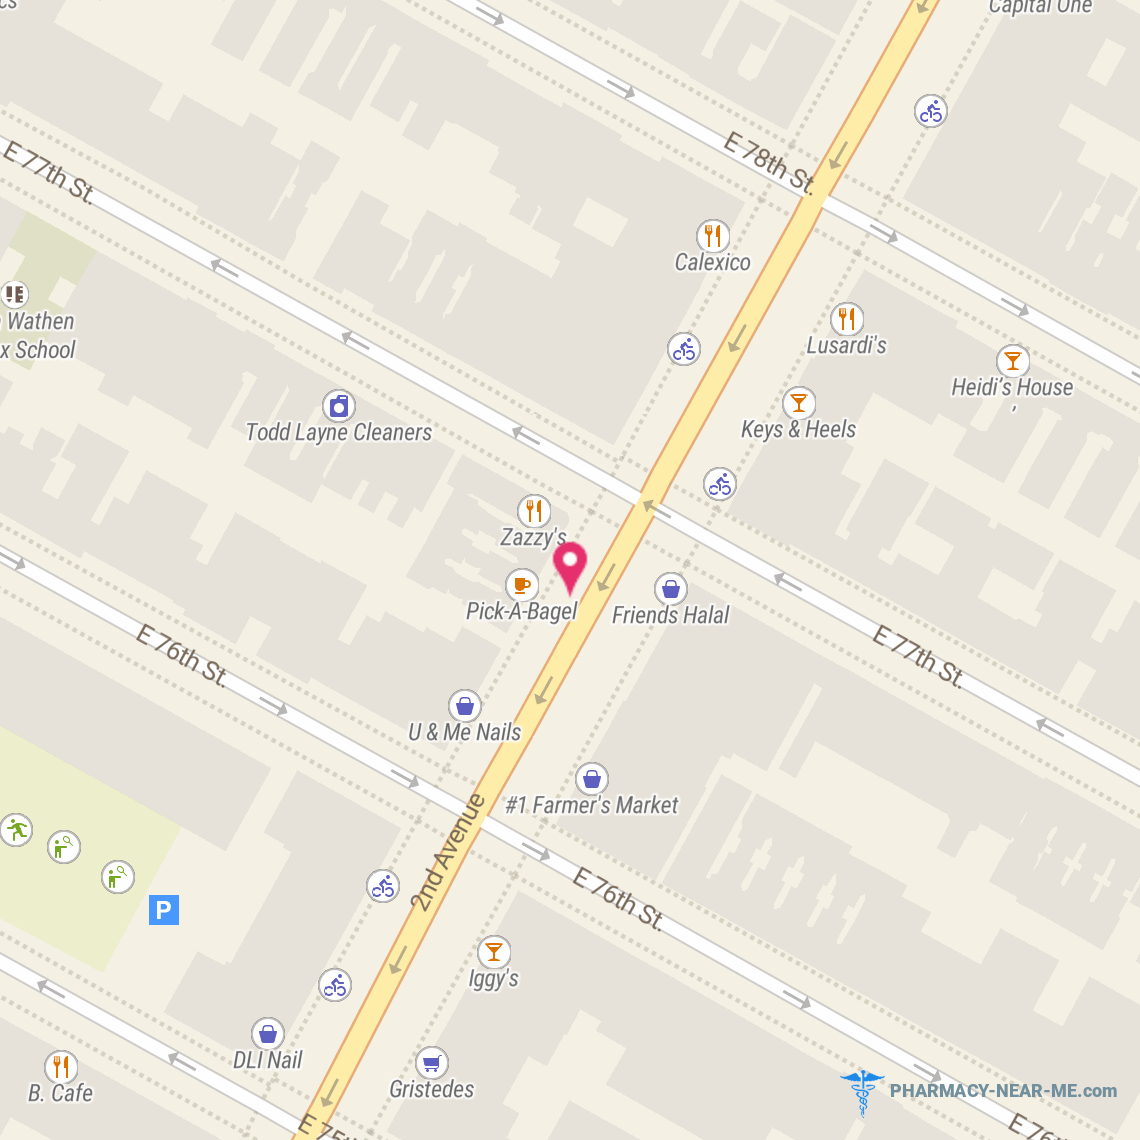 DUANE READE #14236 - Pharmacy Hours, Phone, Reviews & Information: 1524 2nd Avenue, NY, New York 10075, United States